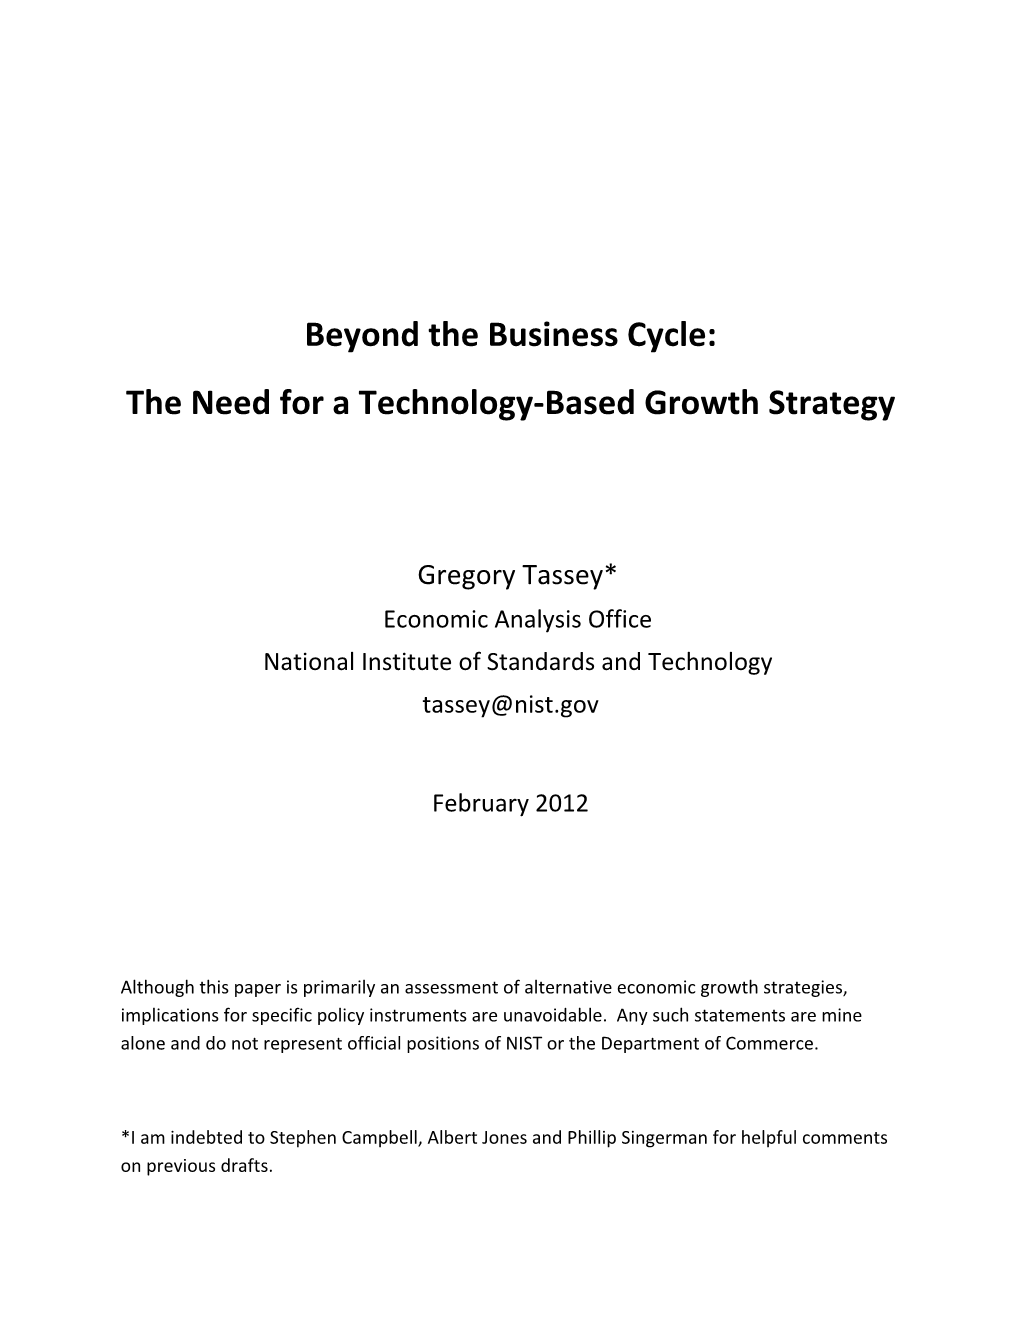 Beyond the Business Cycle: the Need for a Technology-Based Growth Strategy